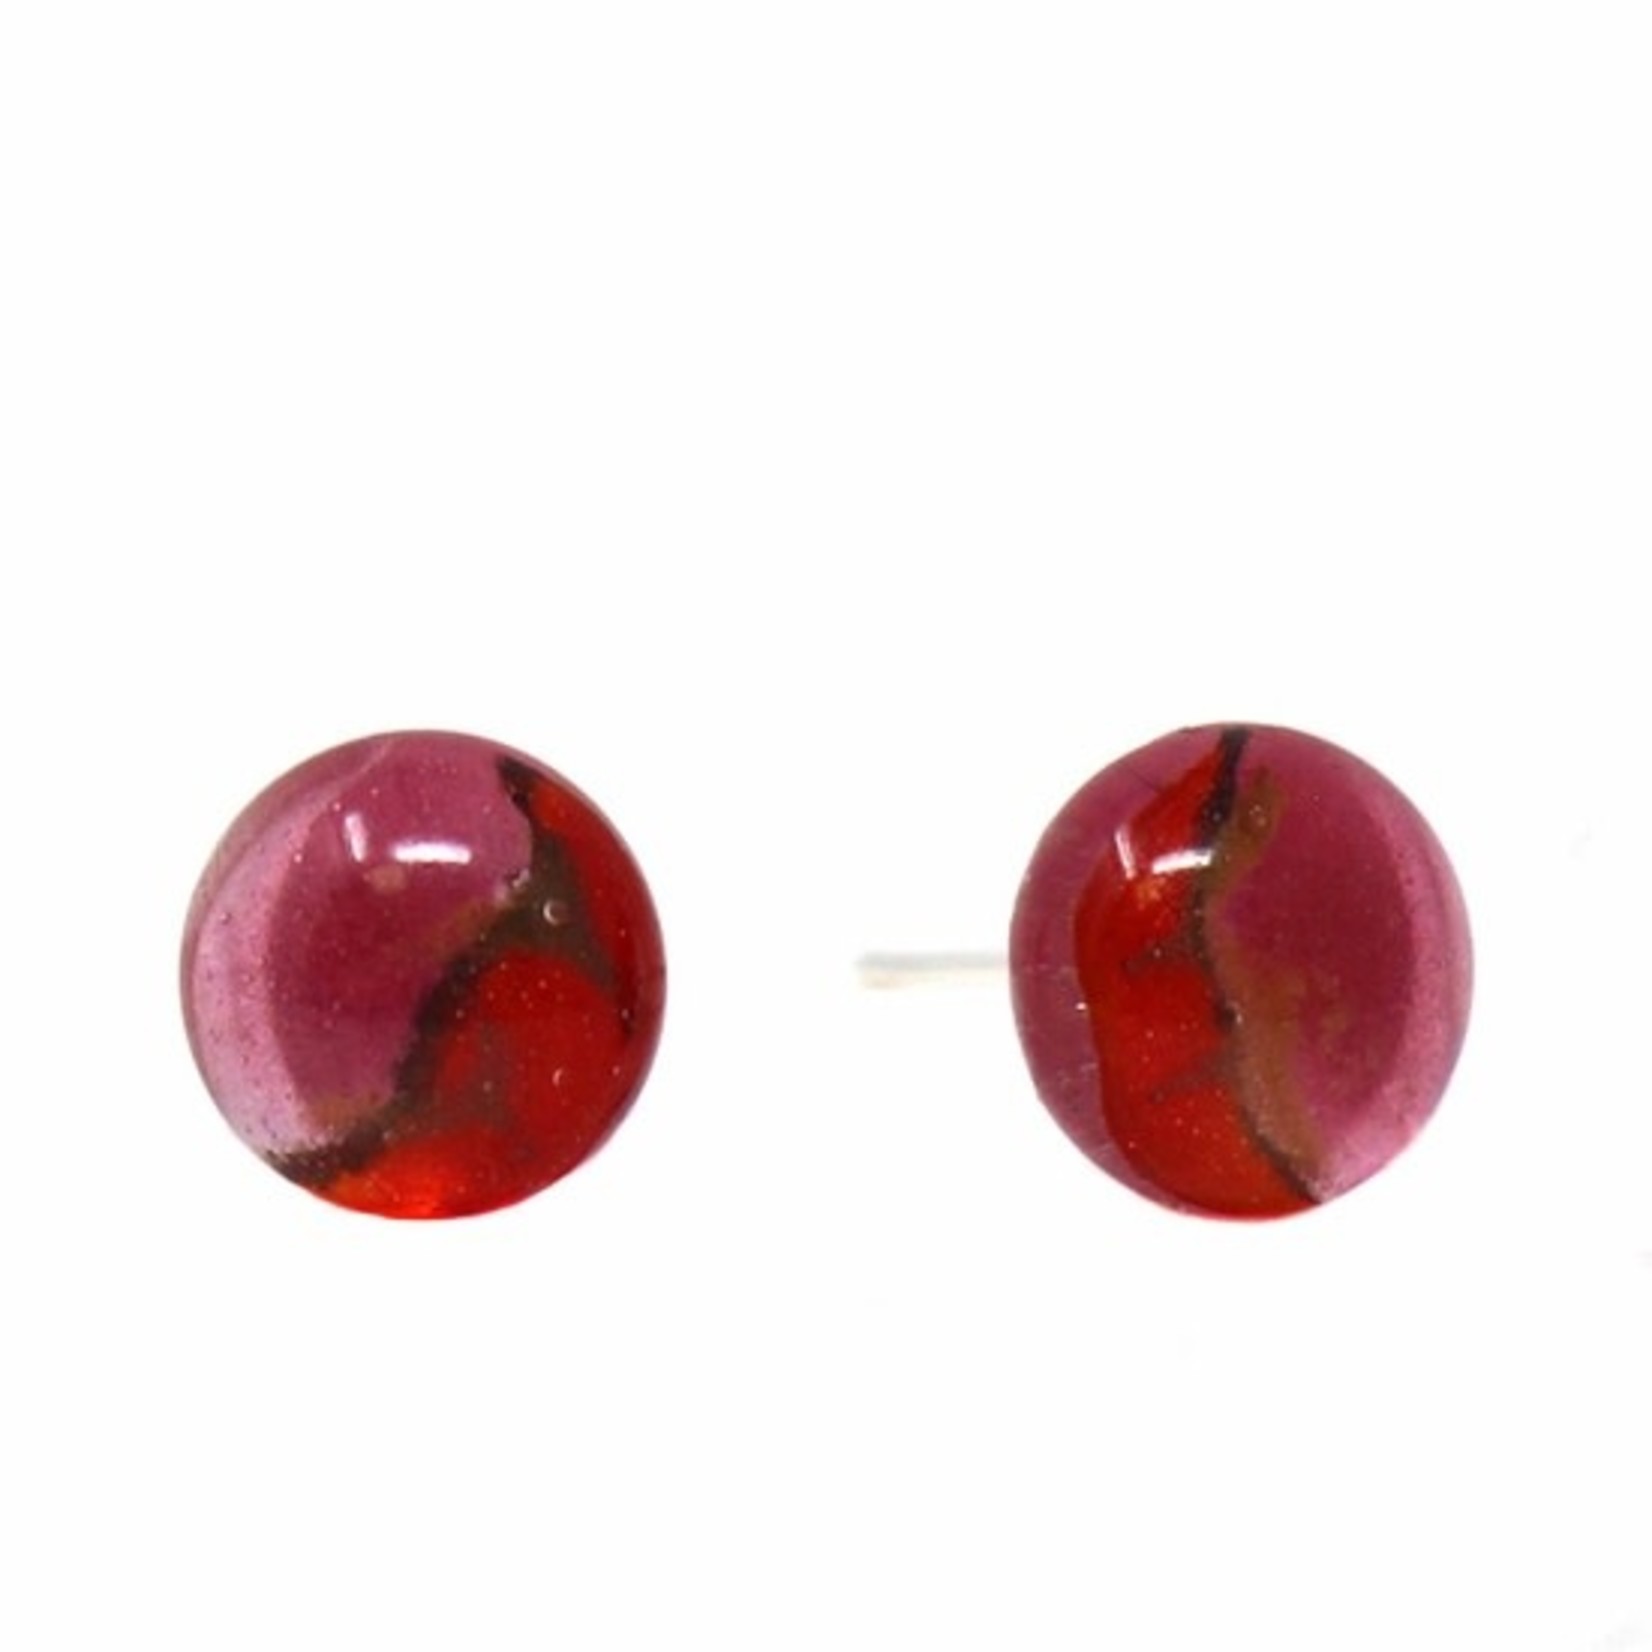 Global Crafts Round Glass Stud Earrings Red, Chile